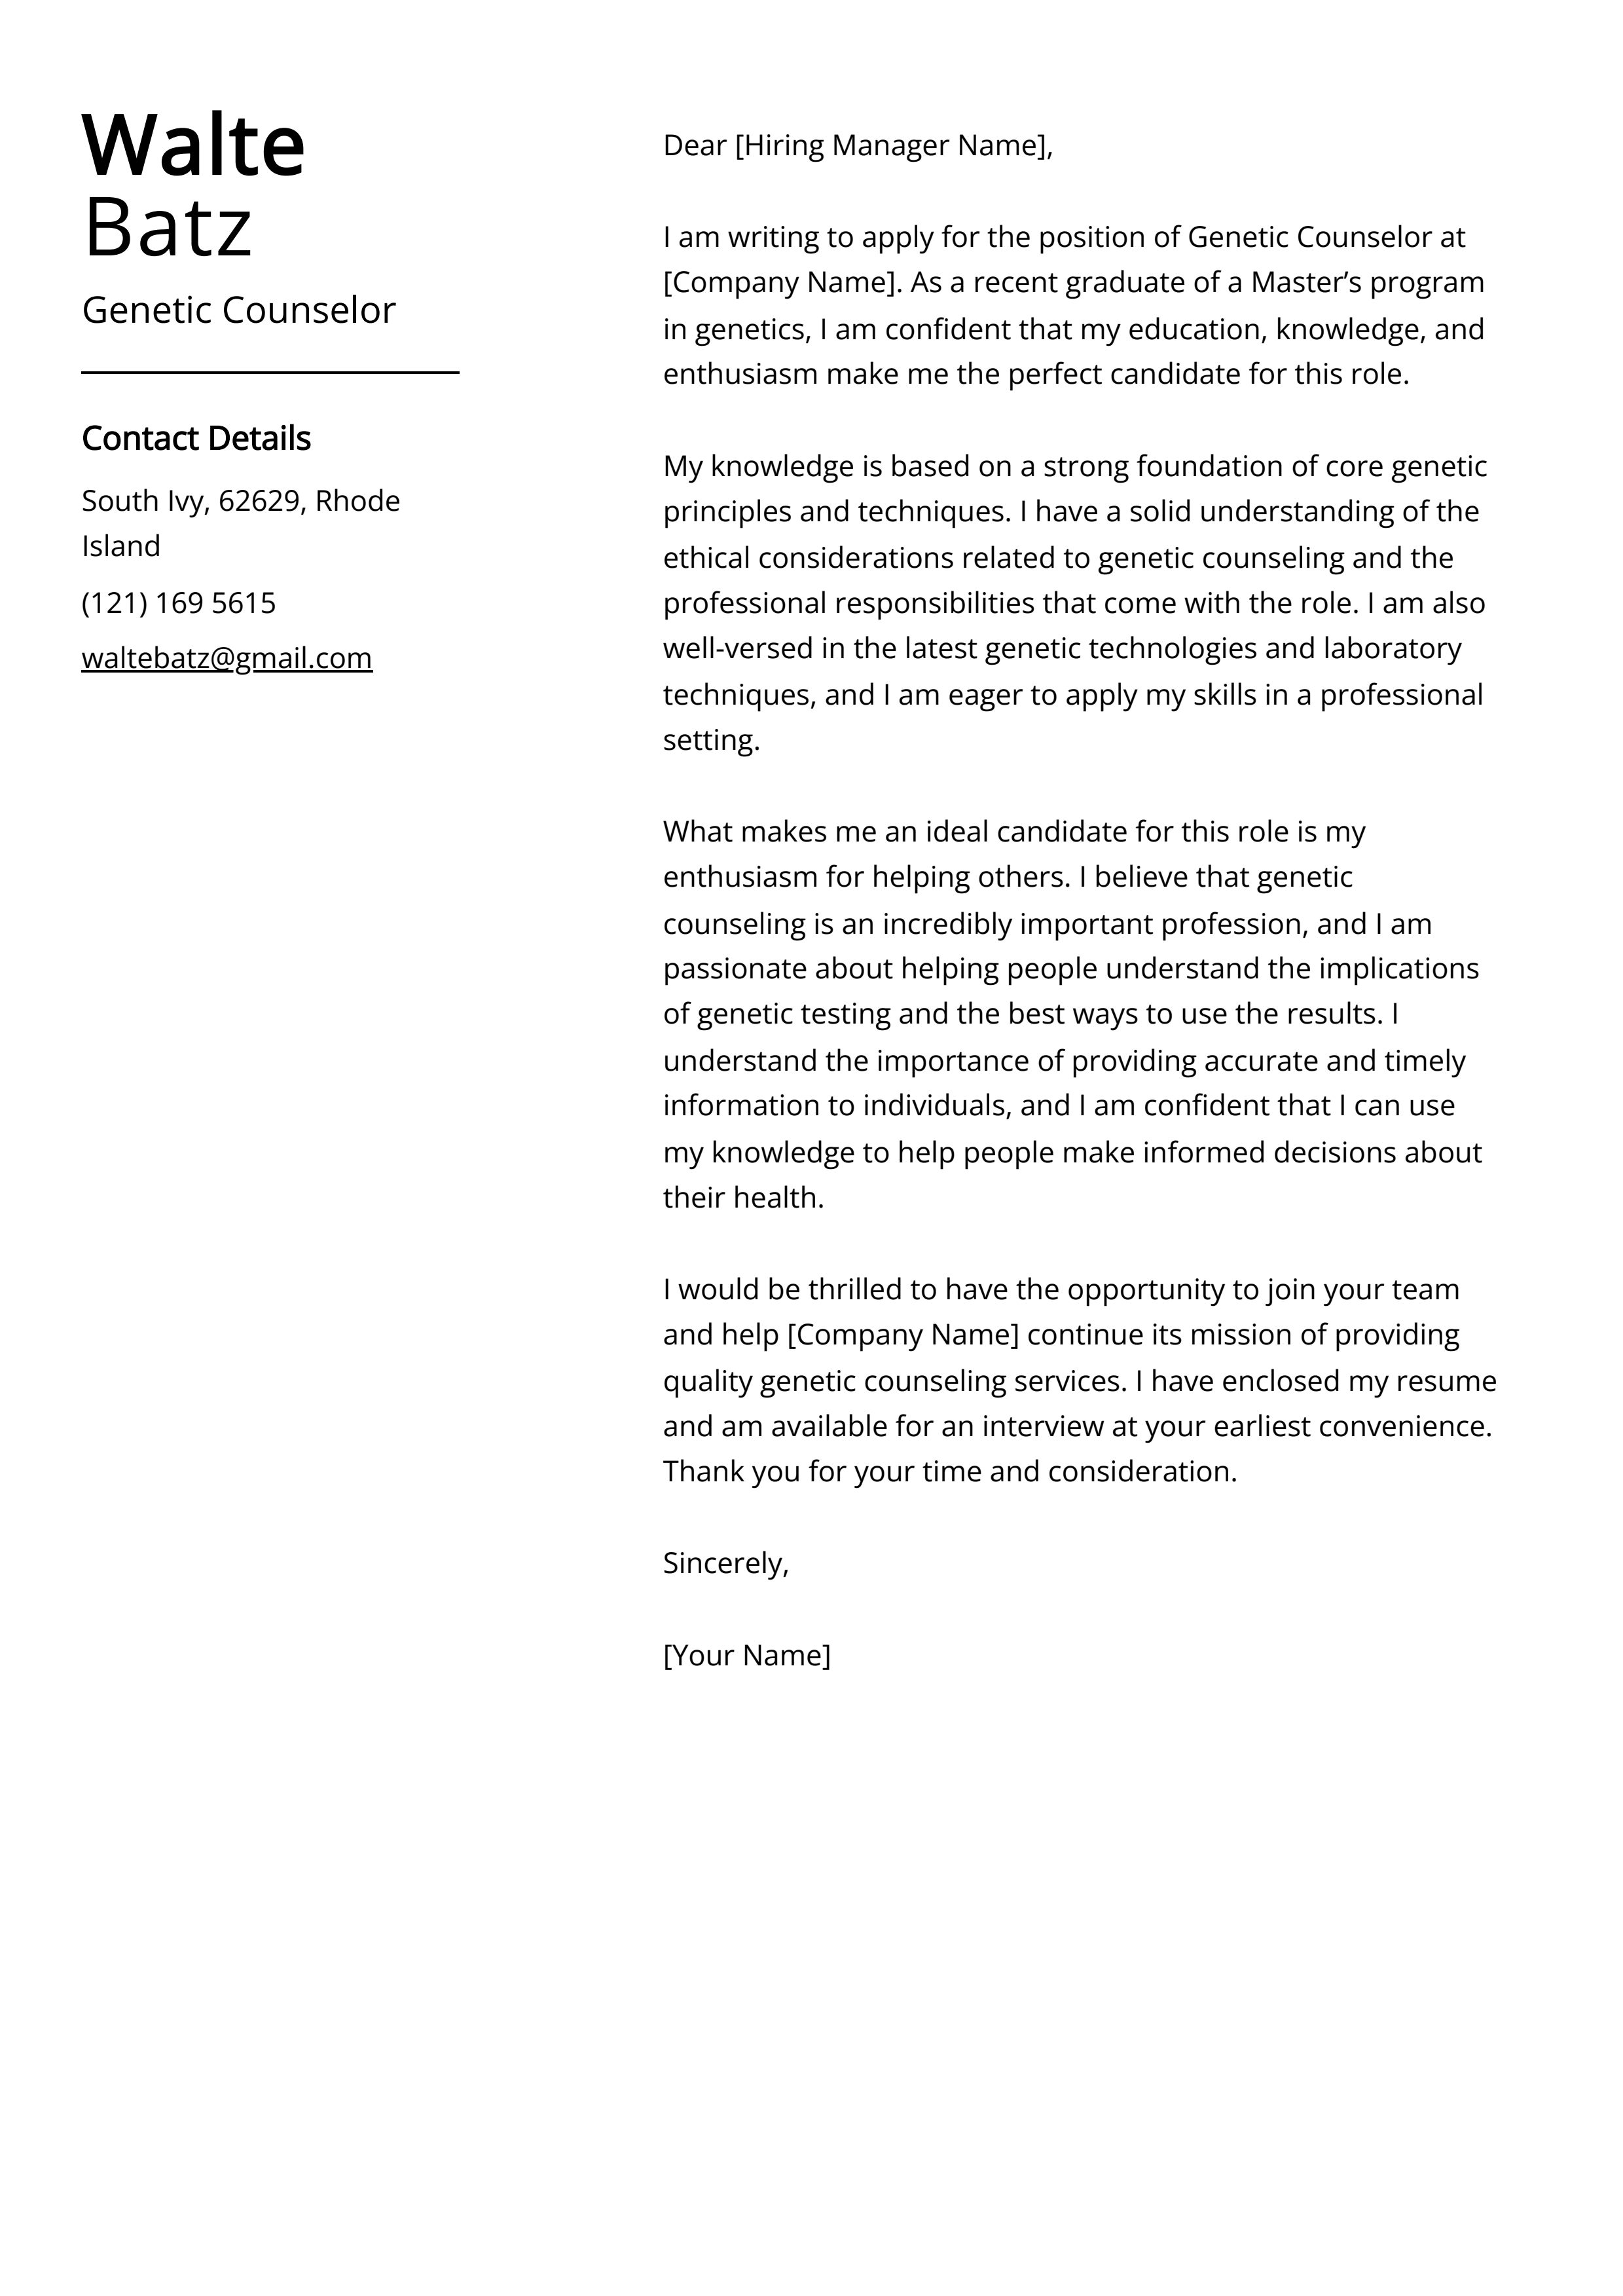 Genetic Counselor Cover Letter Example